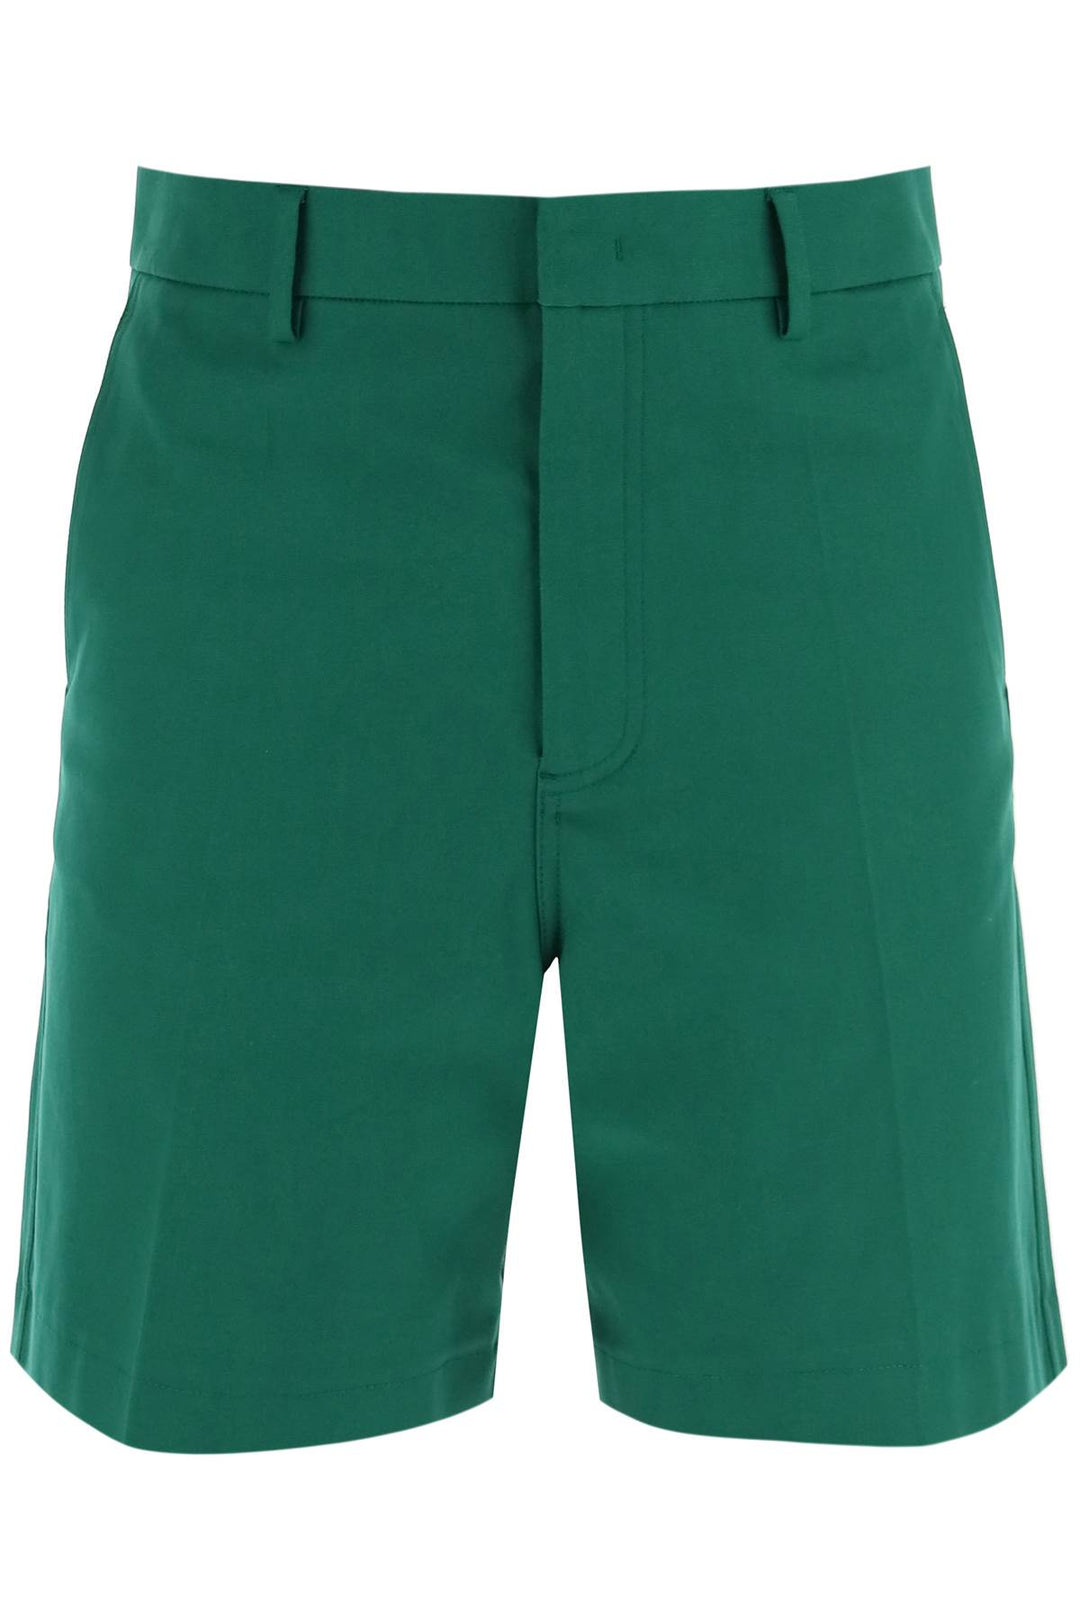 Valentino Garavani Replace With Double Quotecanvas Bermuda Shorts With V Detailreplace With Double Quote   Verde